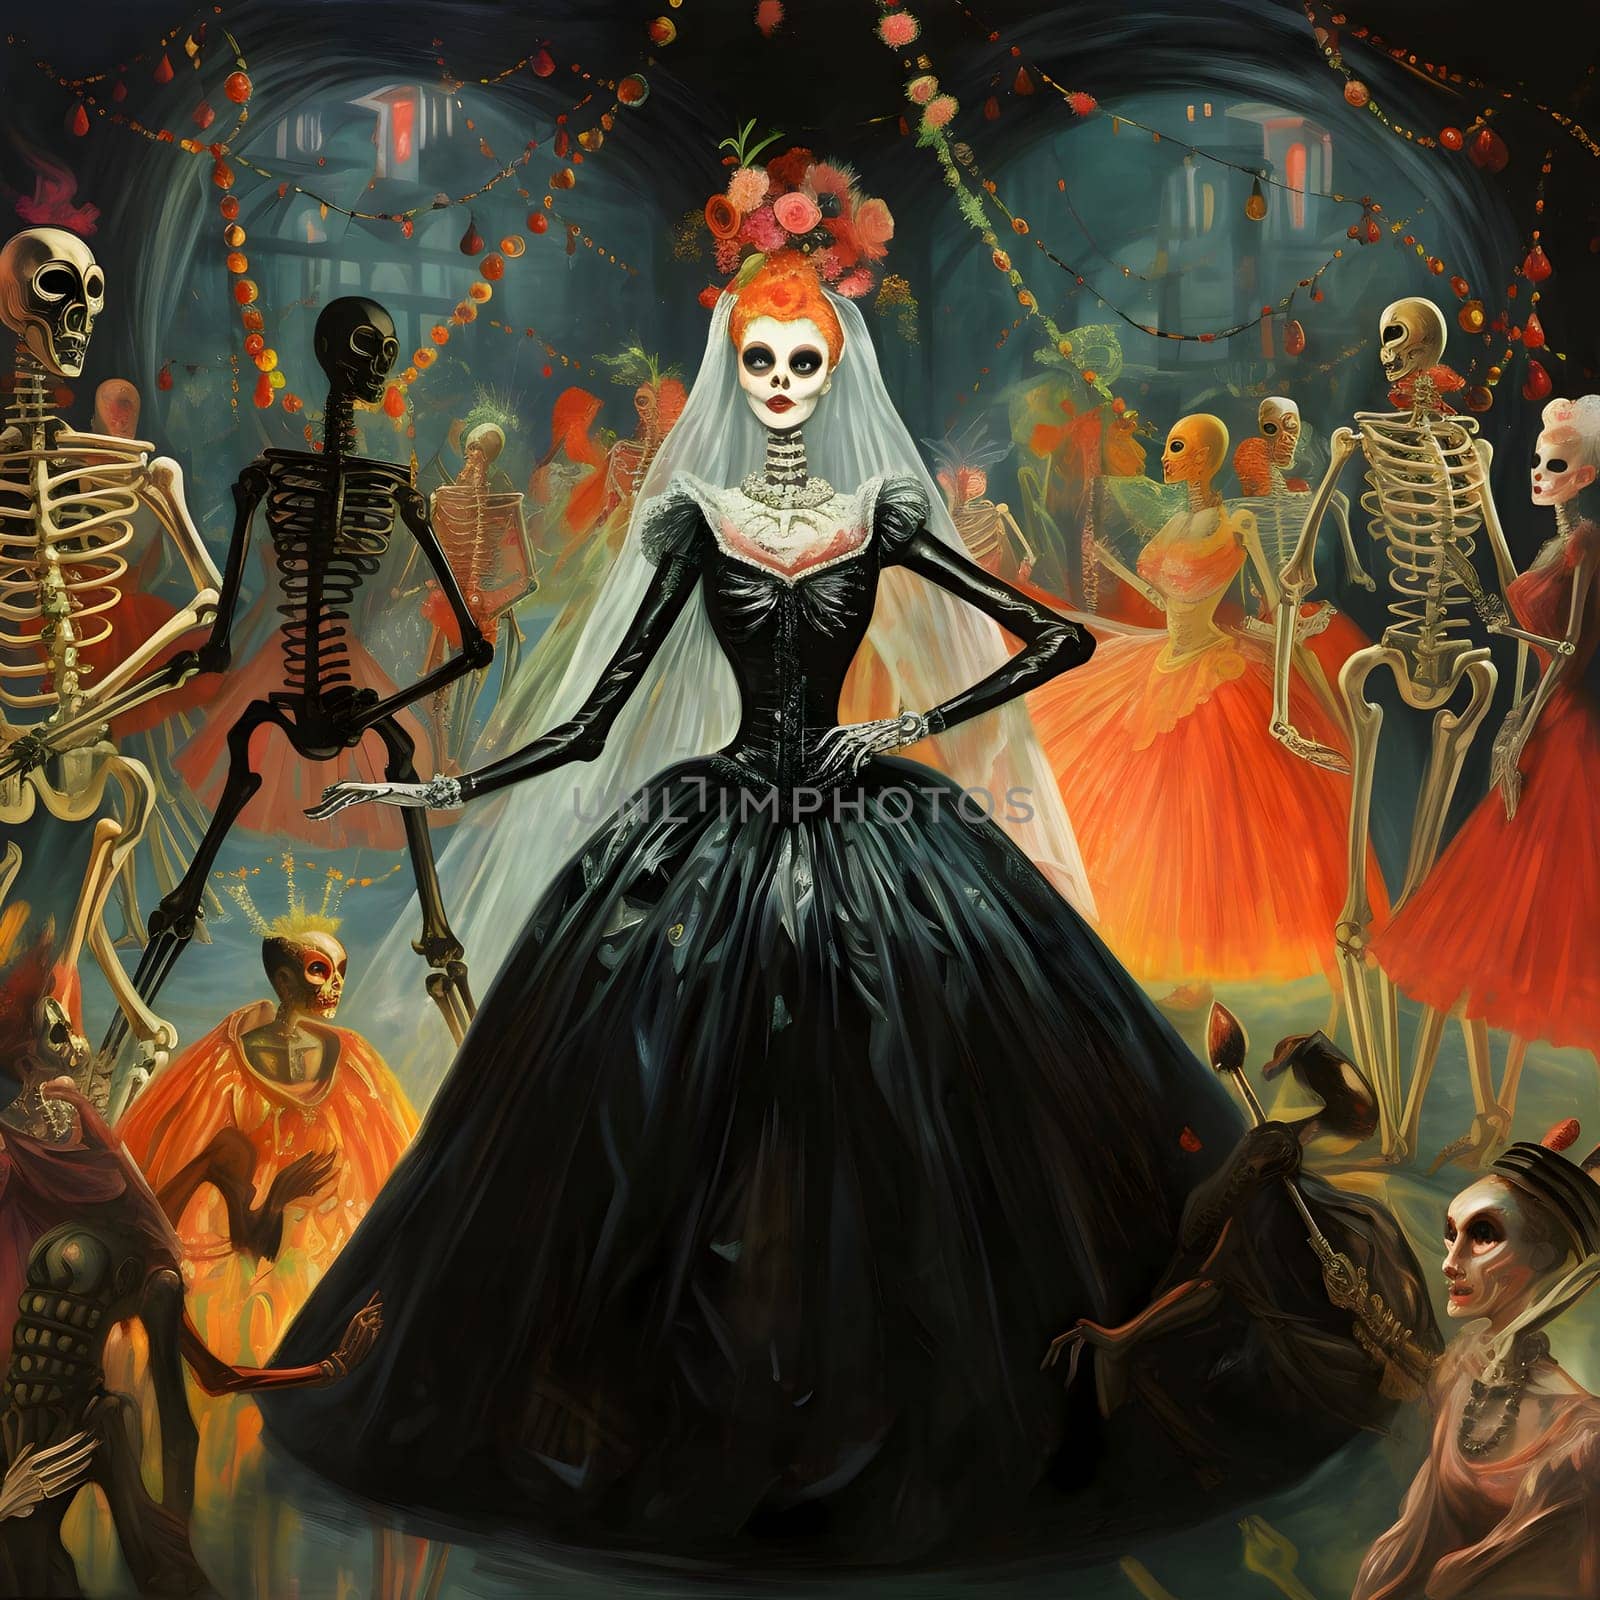 Party of skeletons, corpses, in an elegant long black dress skeleton woman, party of the dead. For the day of the dead and Halloween. Atmosphere of death and solemnity.